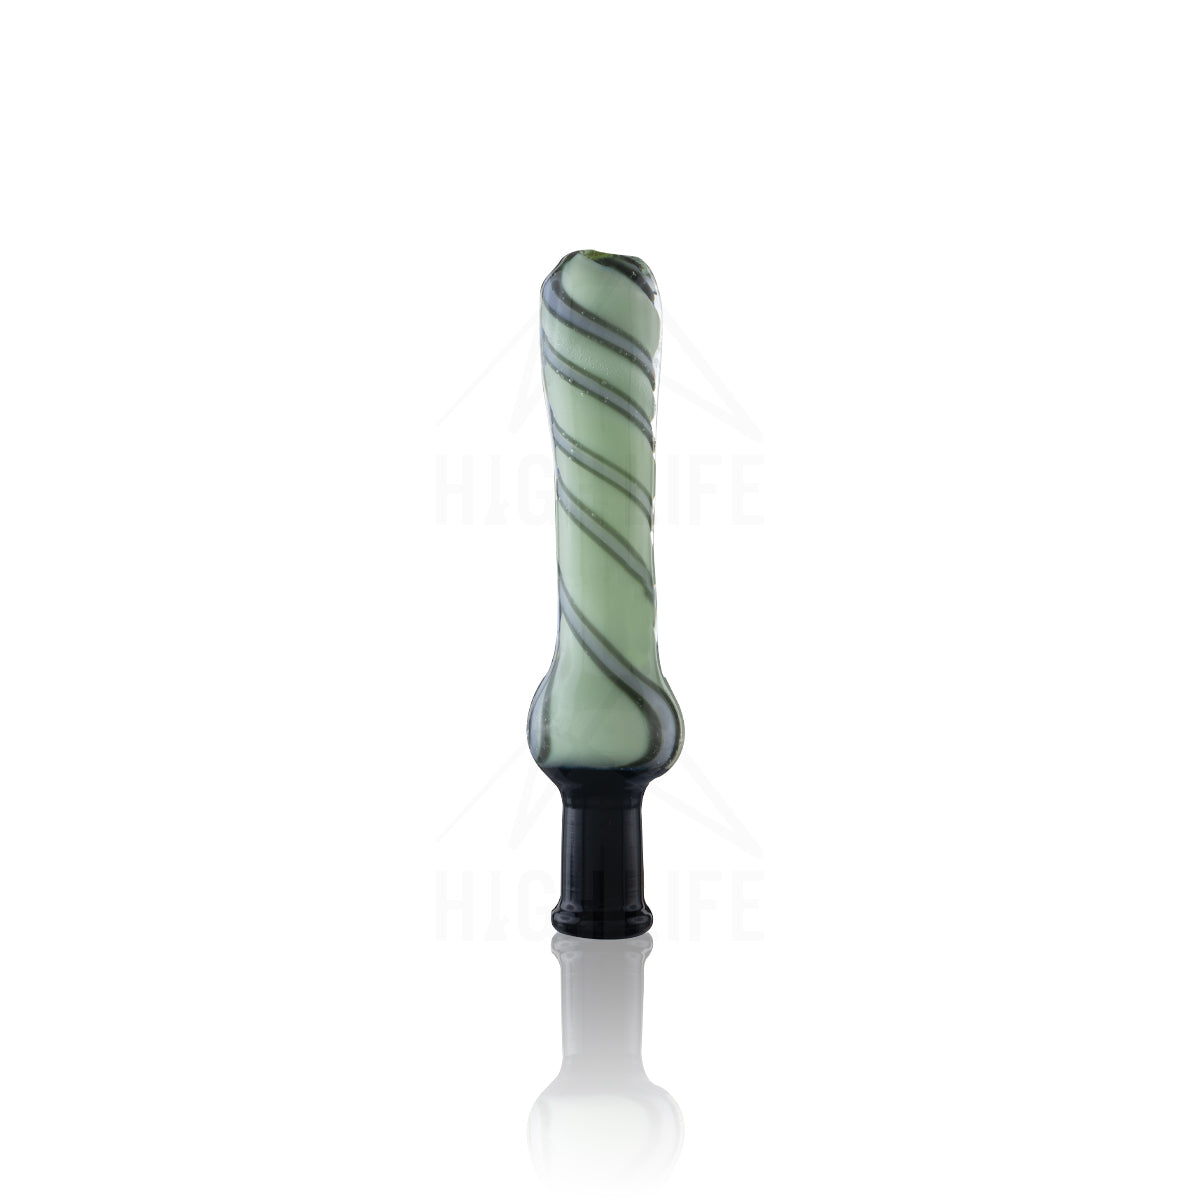 Nectar Collector w/ Quartz Tip | 10mm - Jade Candy Cane Mix - rigs for weed